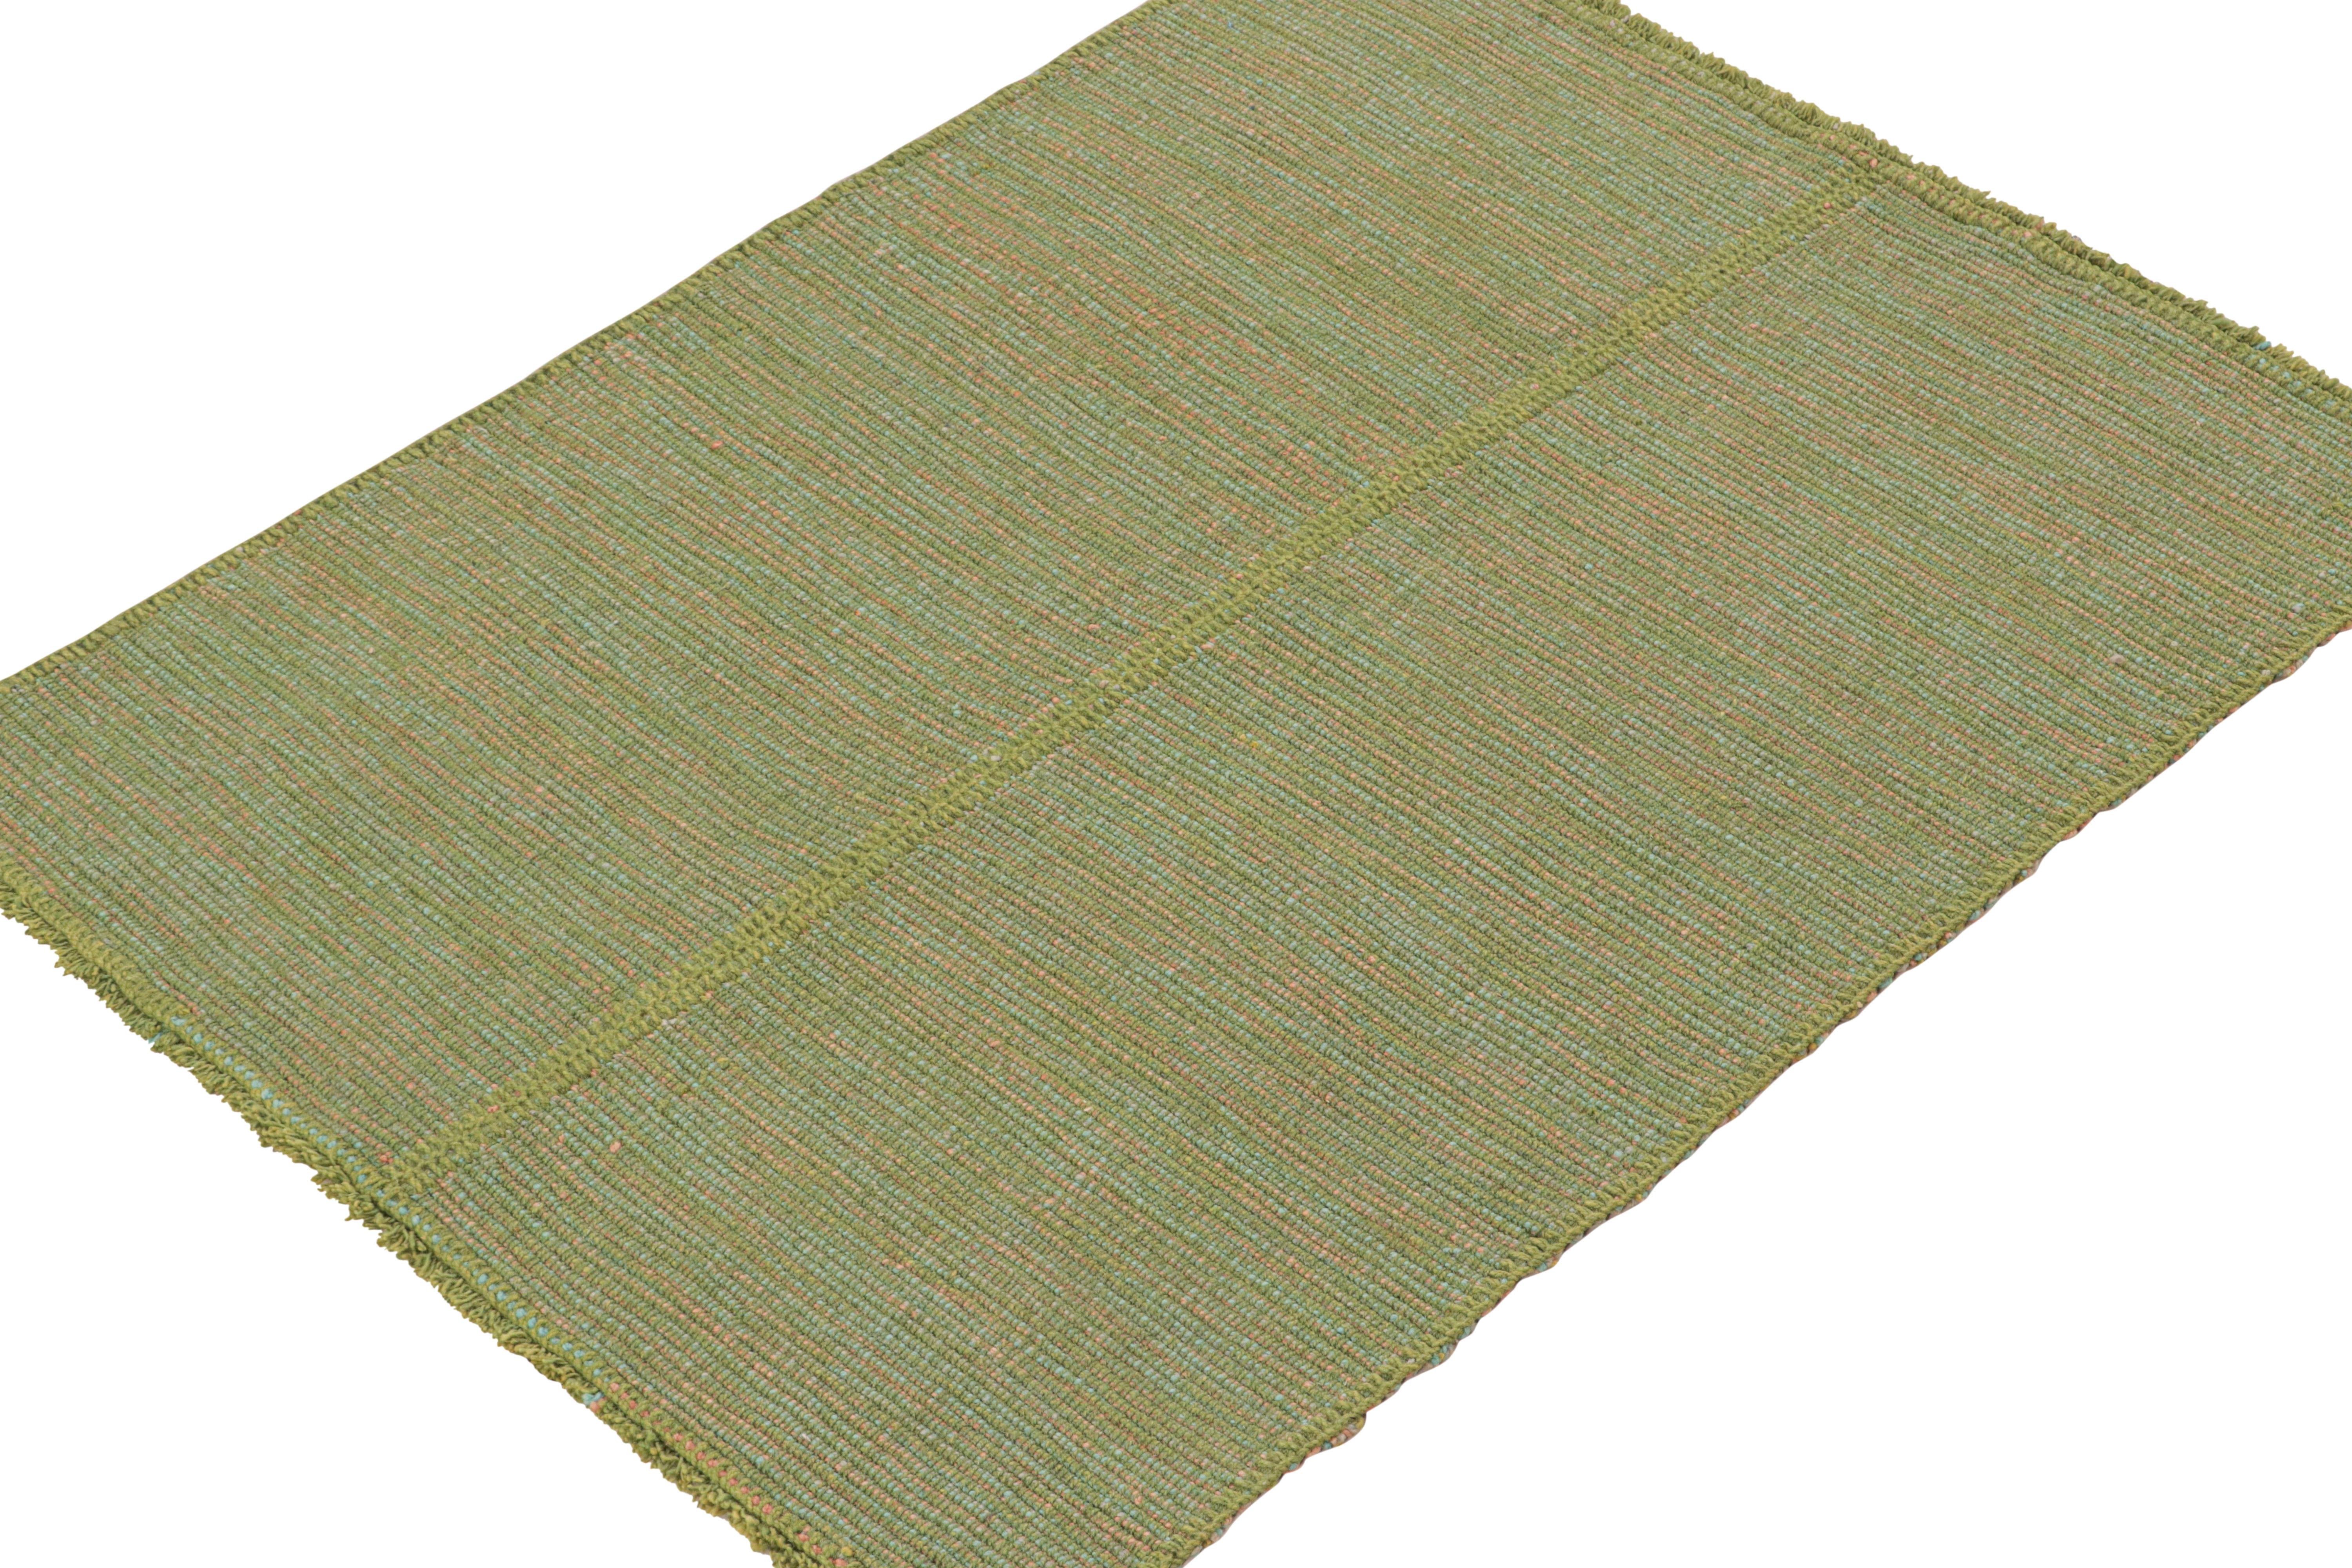 Handwoven in wool, this 4x5 Kilim is from a bold new line of contemporary flatweaves by Rug & Kilim.

Further On the Design:

The “Rez Kilim” connotes a modern take on classic panel weaving. This edition enjoys chartreuse green with teal and